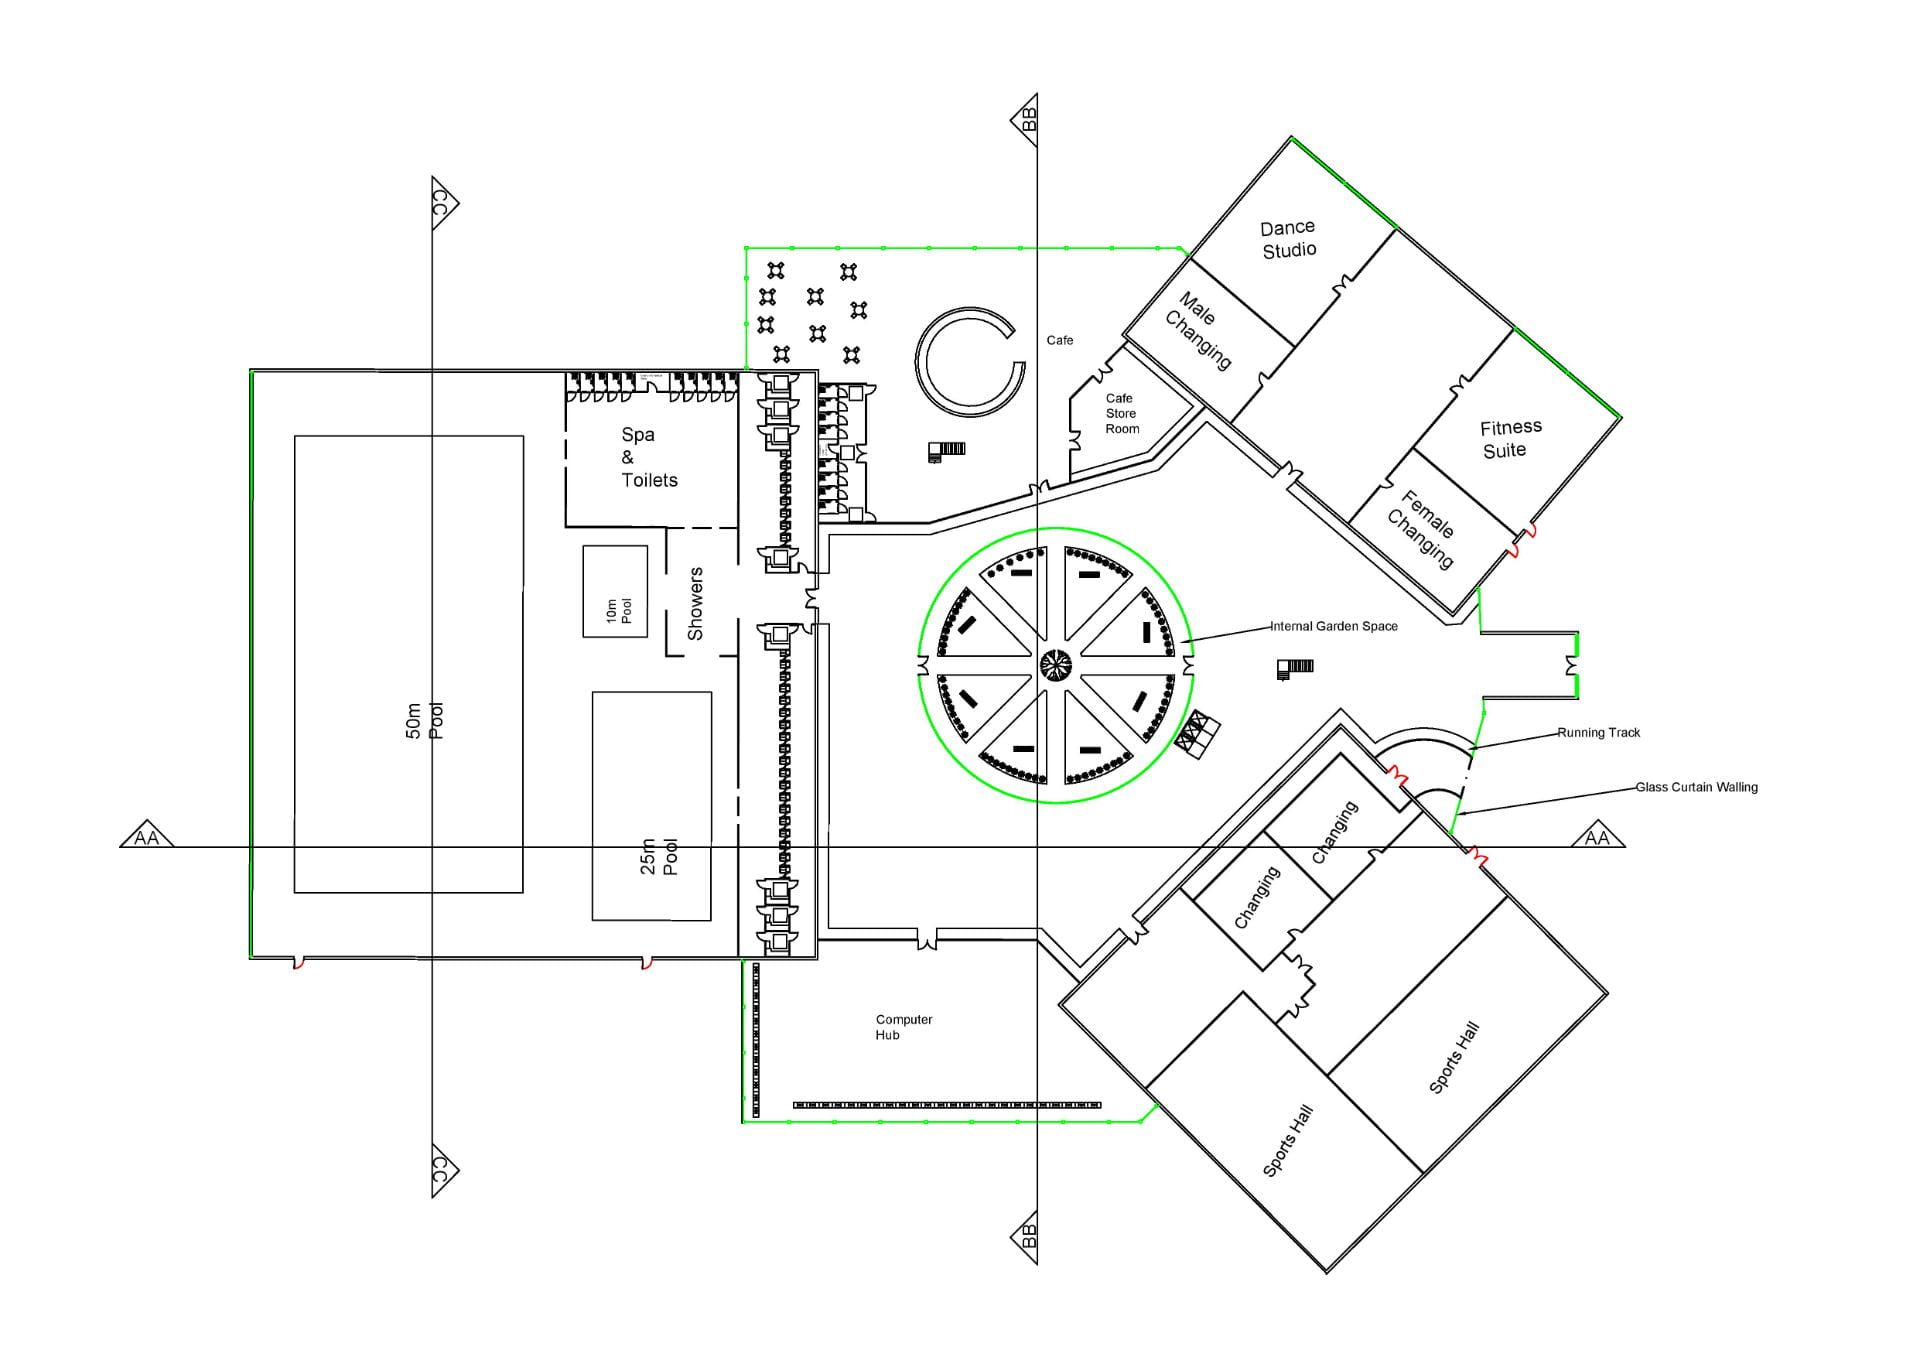 Ground floor plan for the building